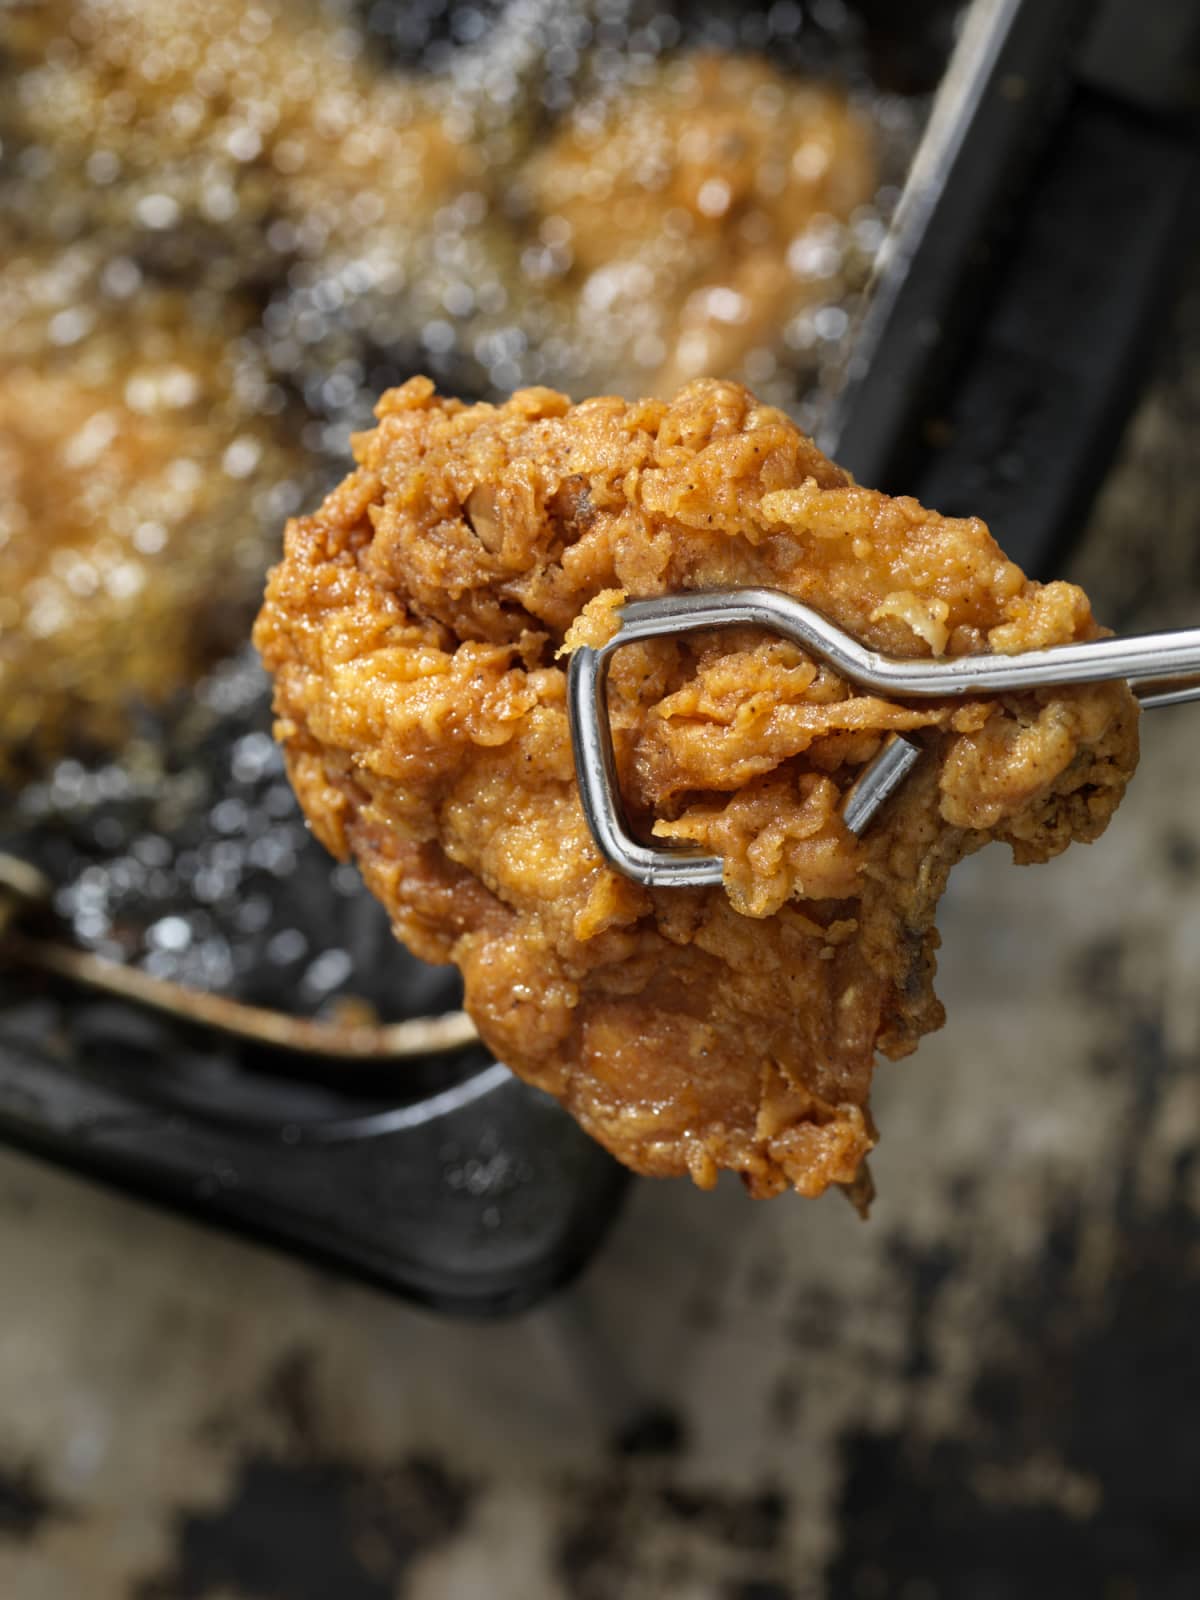 Piece of fried chicken held by tongs